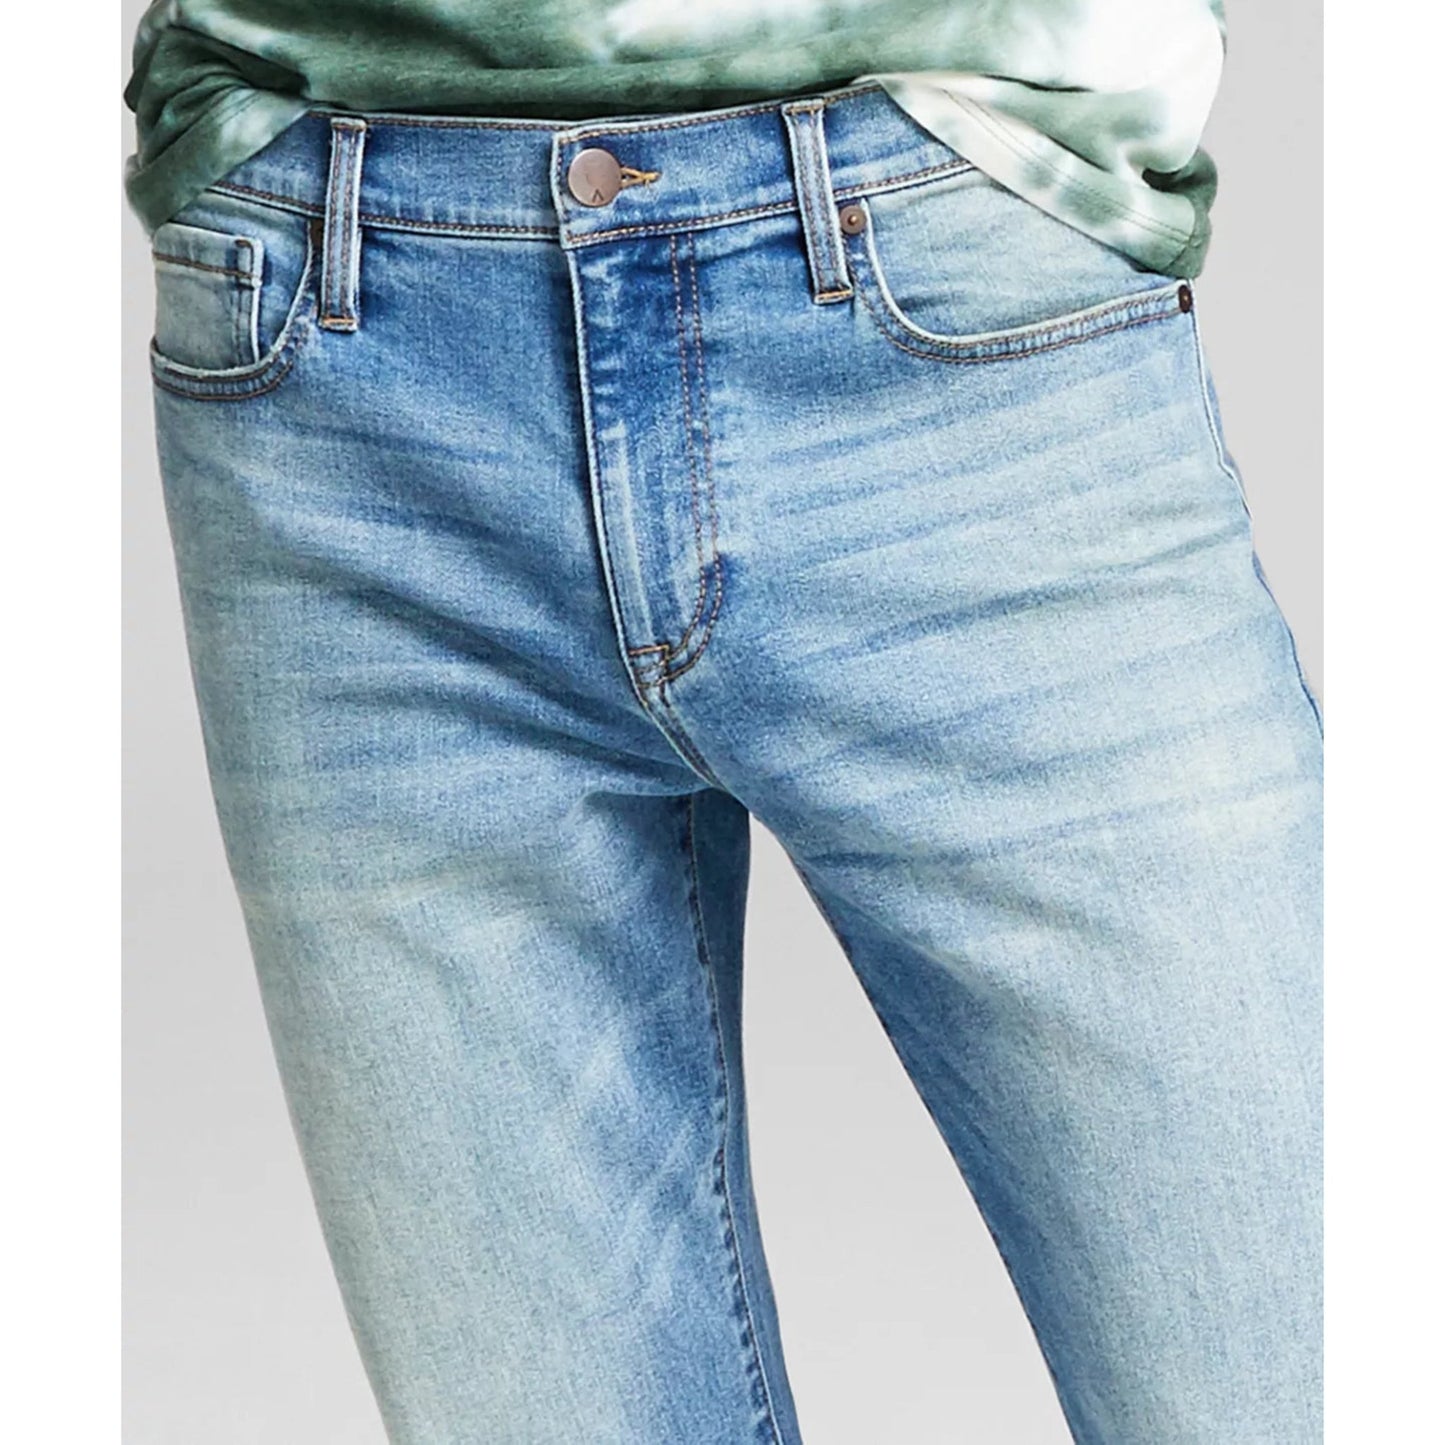 And Now This-And Now This Mens Destructed Slim-Fit Stretch Jeans, Blue, Size: 33x32 - Brandat Outlet